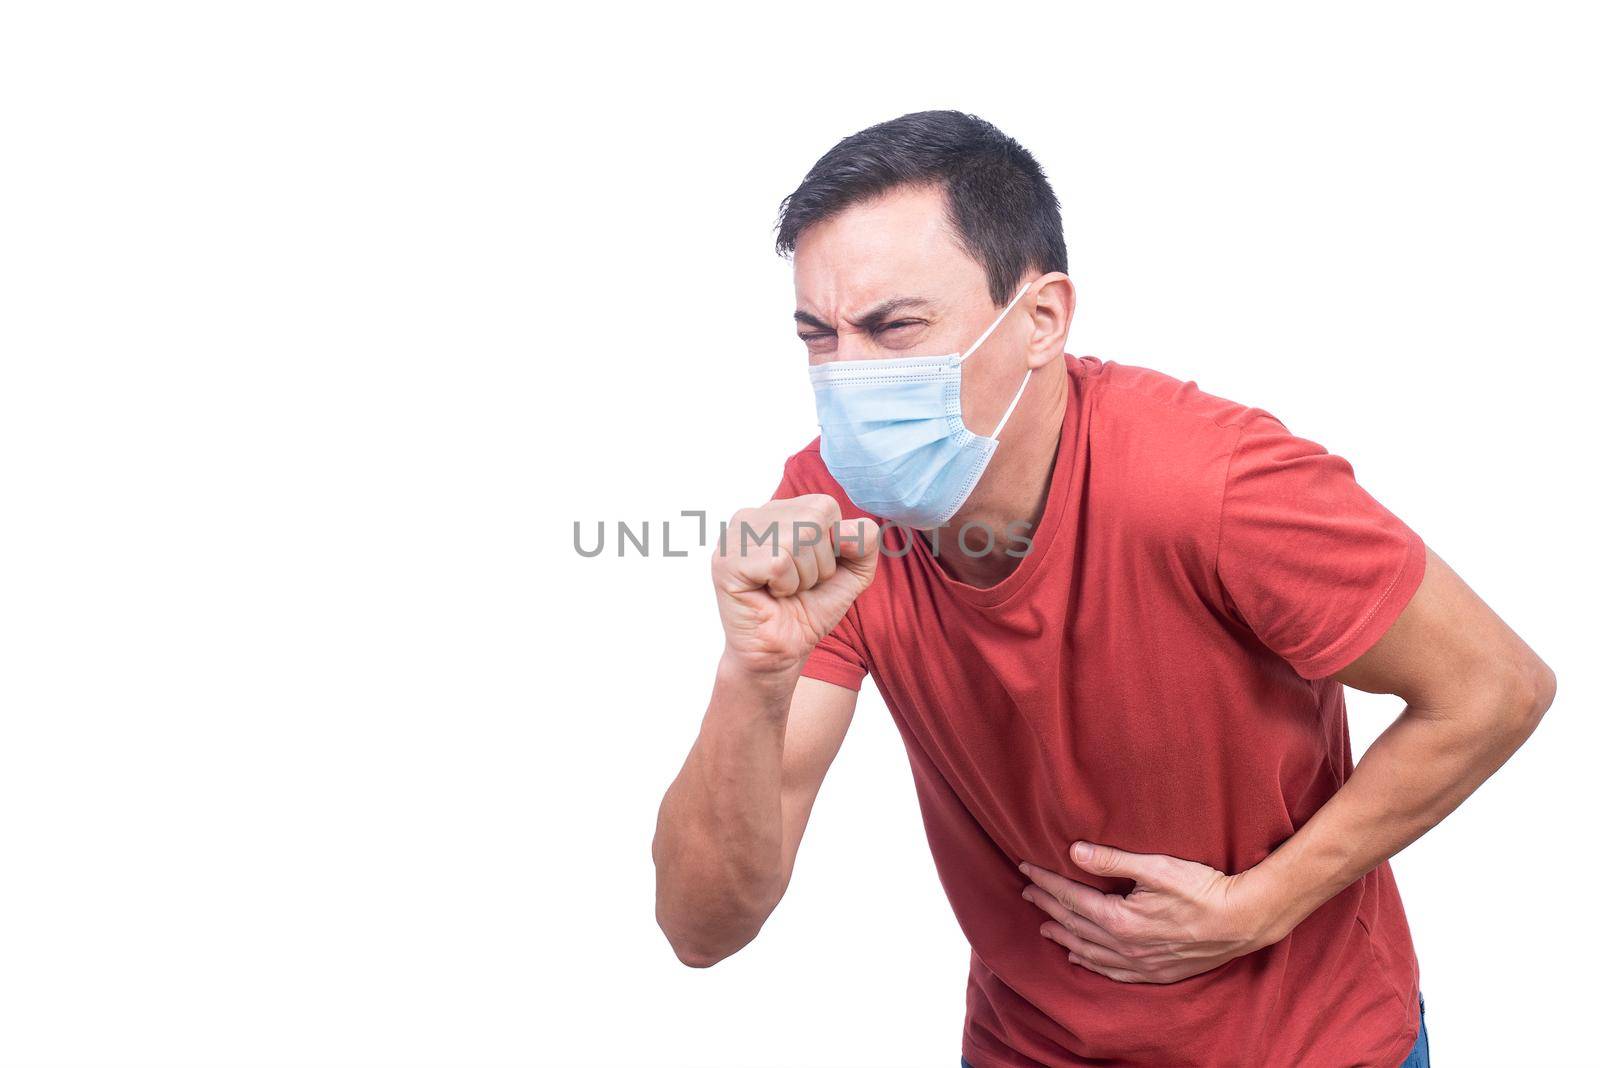 Sick male in t shirt and protective mask coughing standing isolated on white background during coronavirus epidemic in light studio